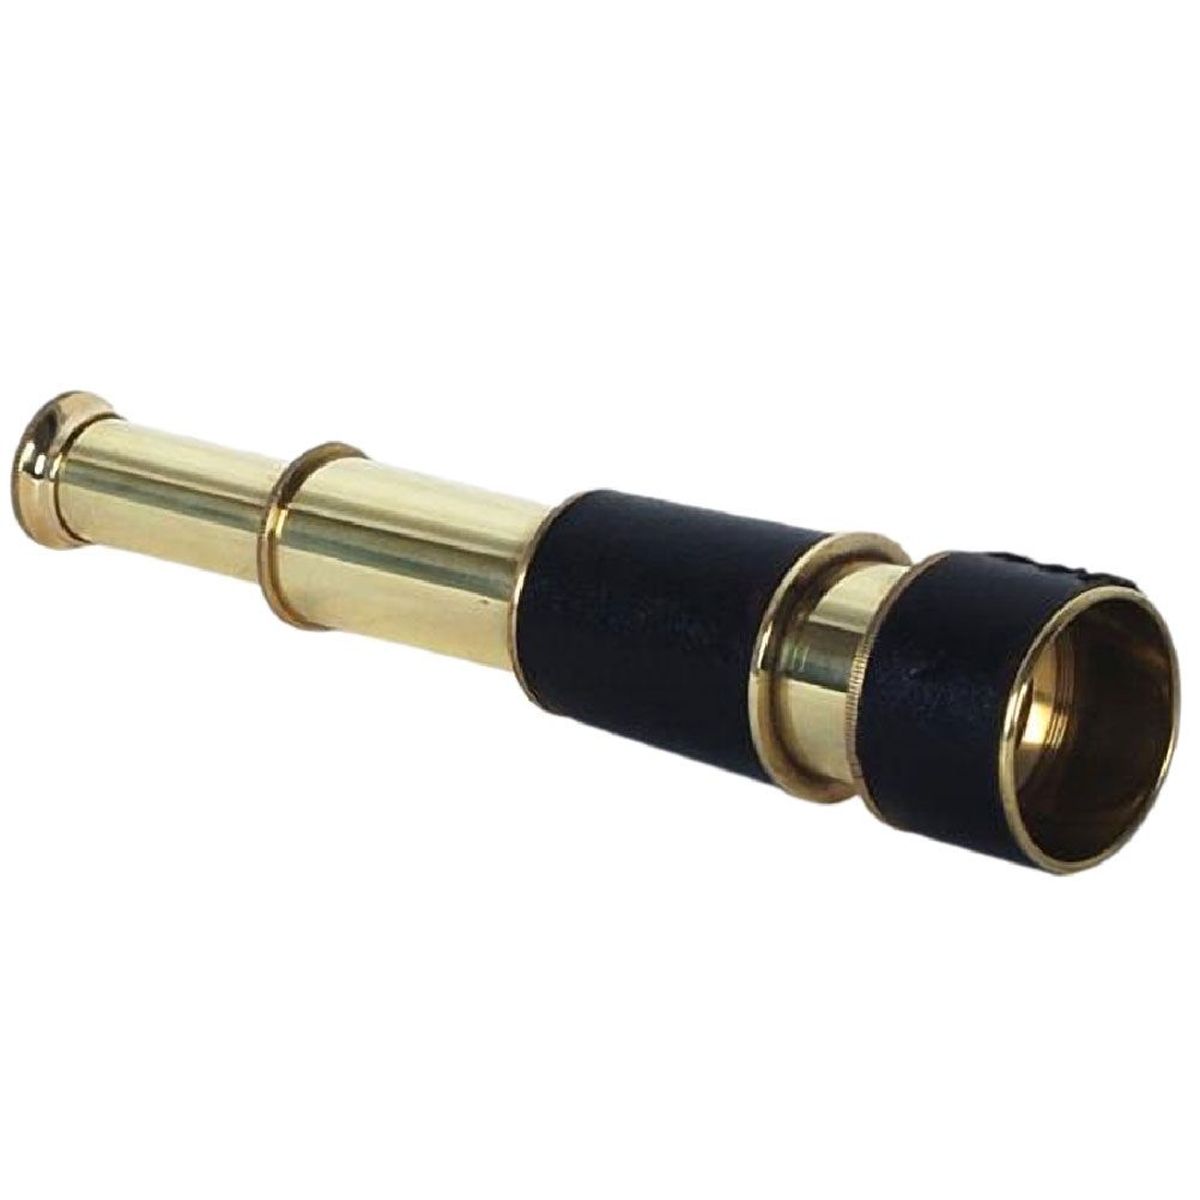 Spotting scope in brass and leather